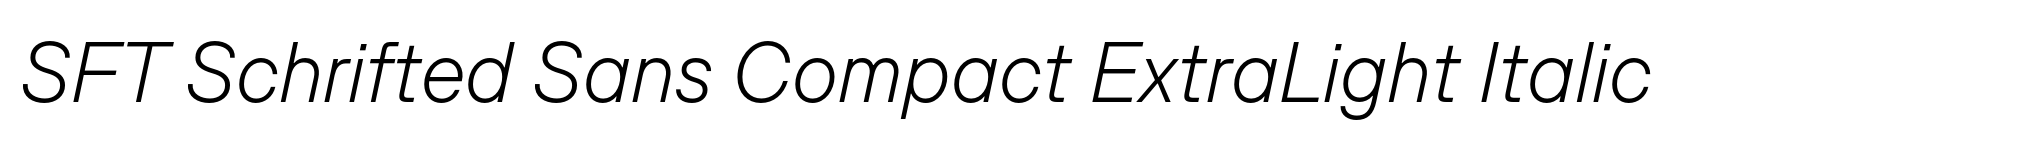 SFT Schrifted Sans Compact ExtraLight Italic image